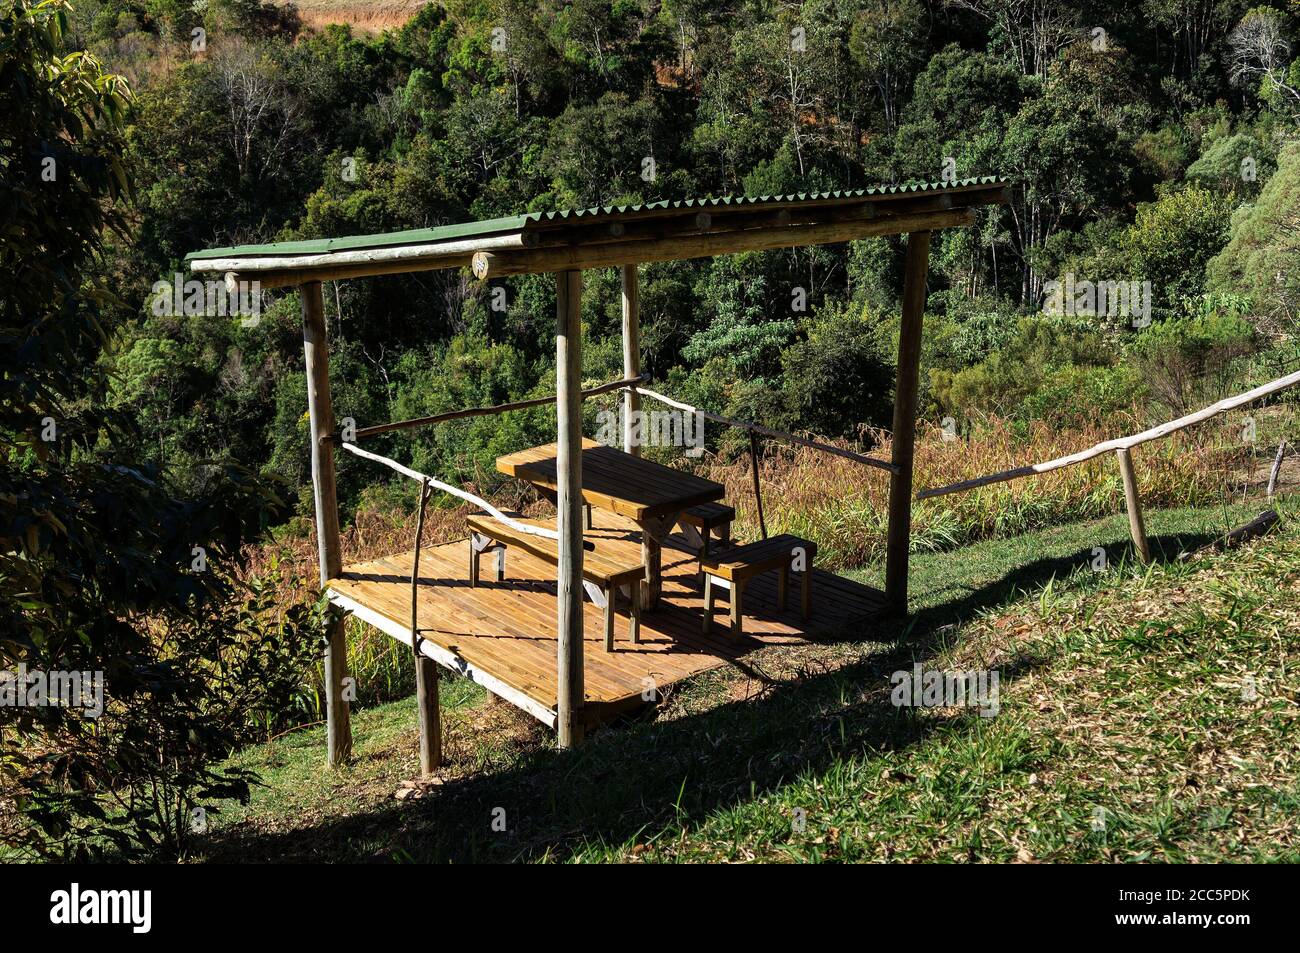 Viewing spot on a hillside inside 'O Contemplario' farm where is possible to view almost the entire ranch located in the mountainous region of Cunha. Stock Photo